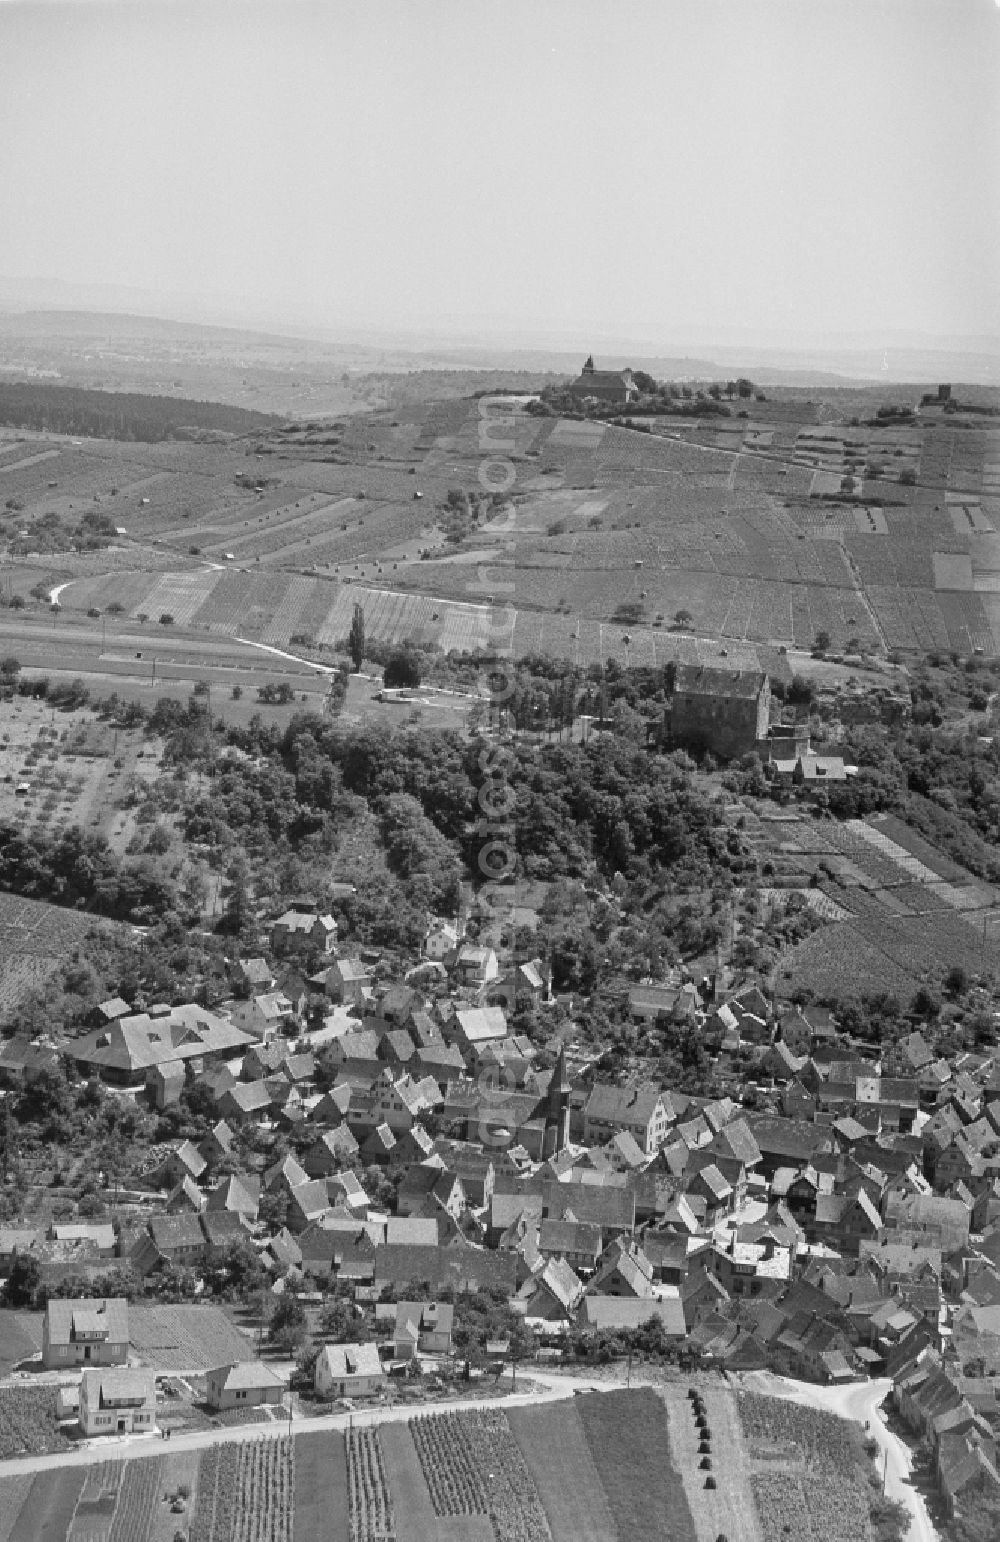 Cleebronn from above - Village view on the edge of agricultural fields and land in Cleebronn in the state Baden-Wuerttemberg, Germany